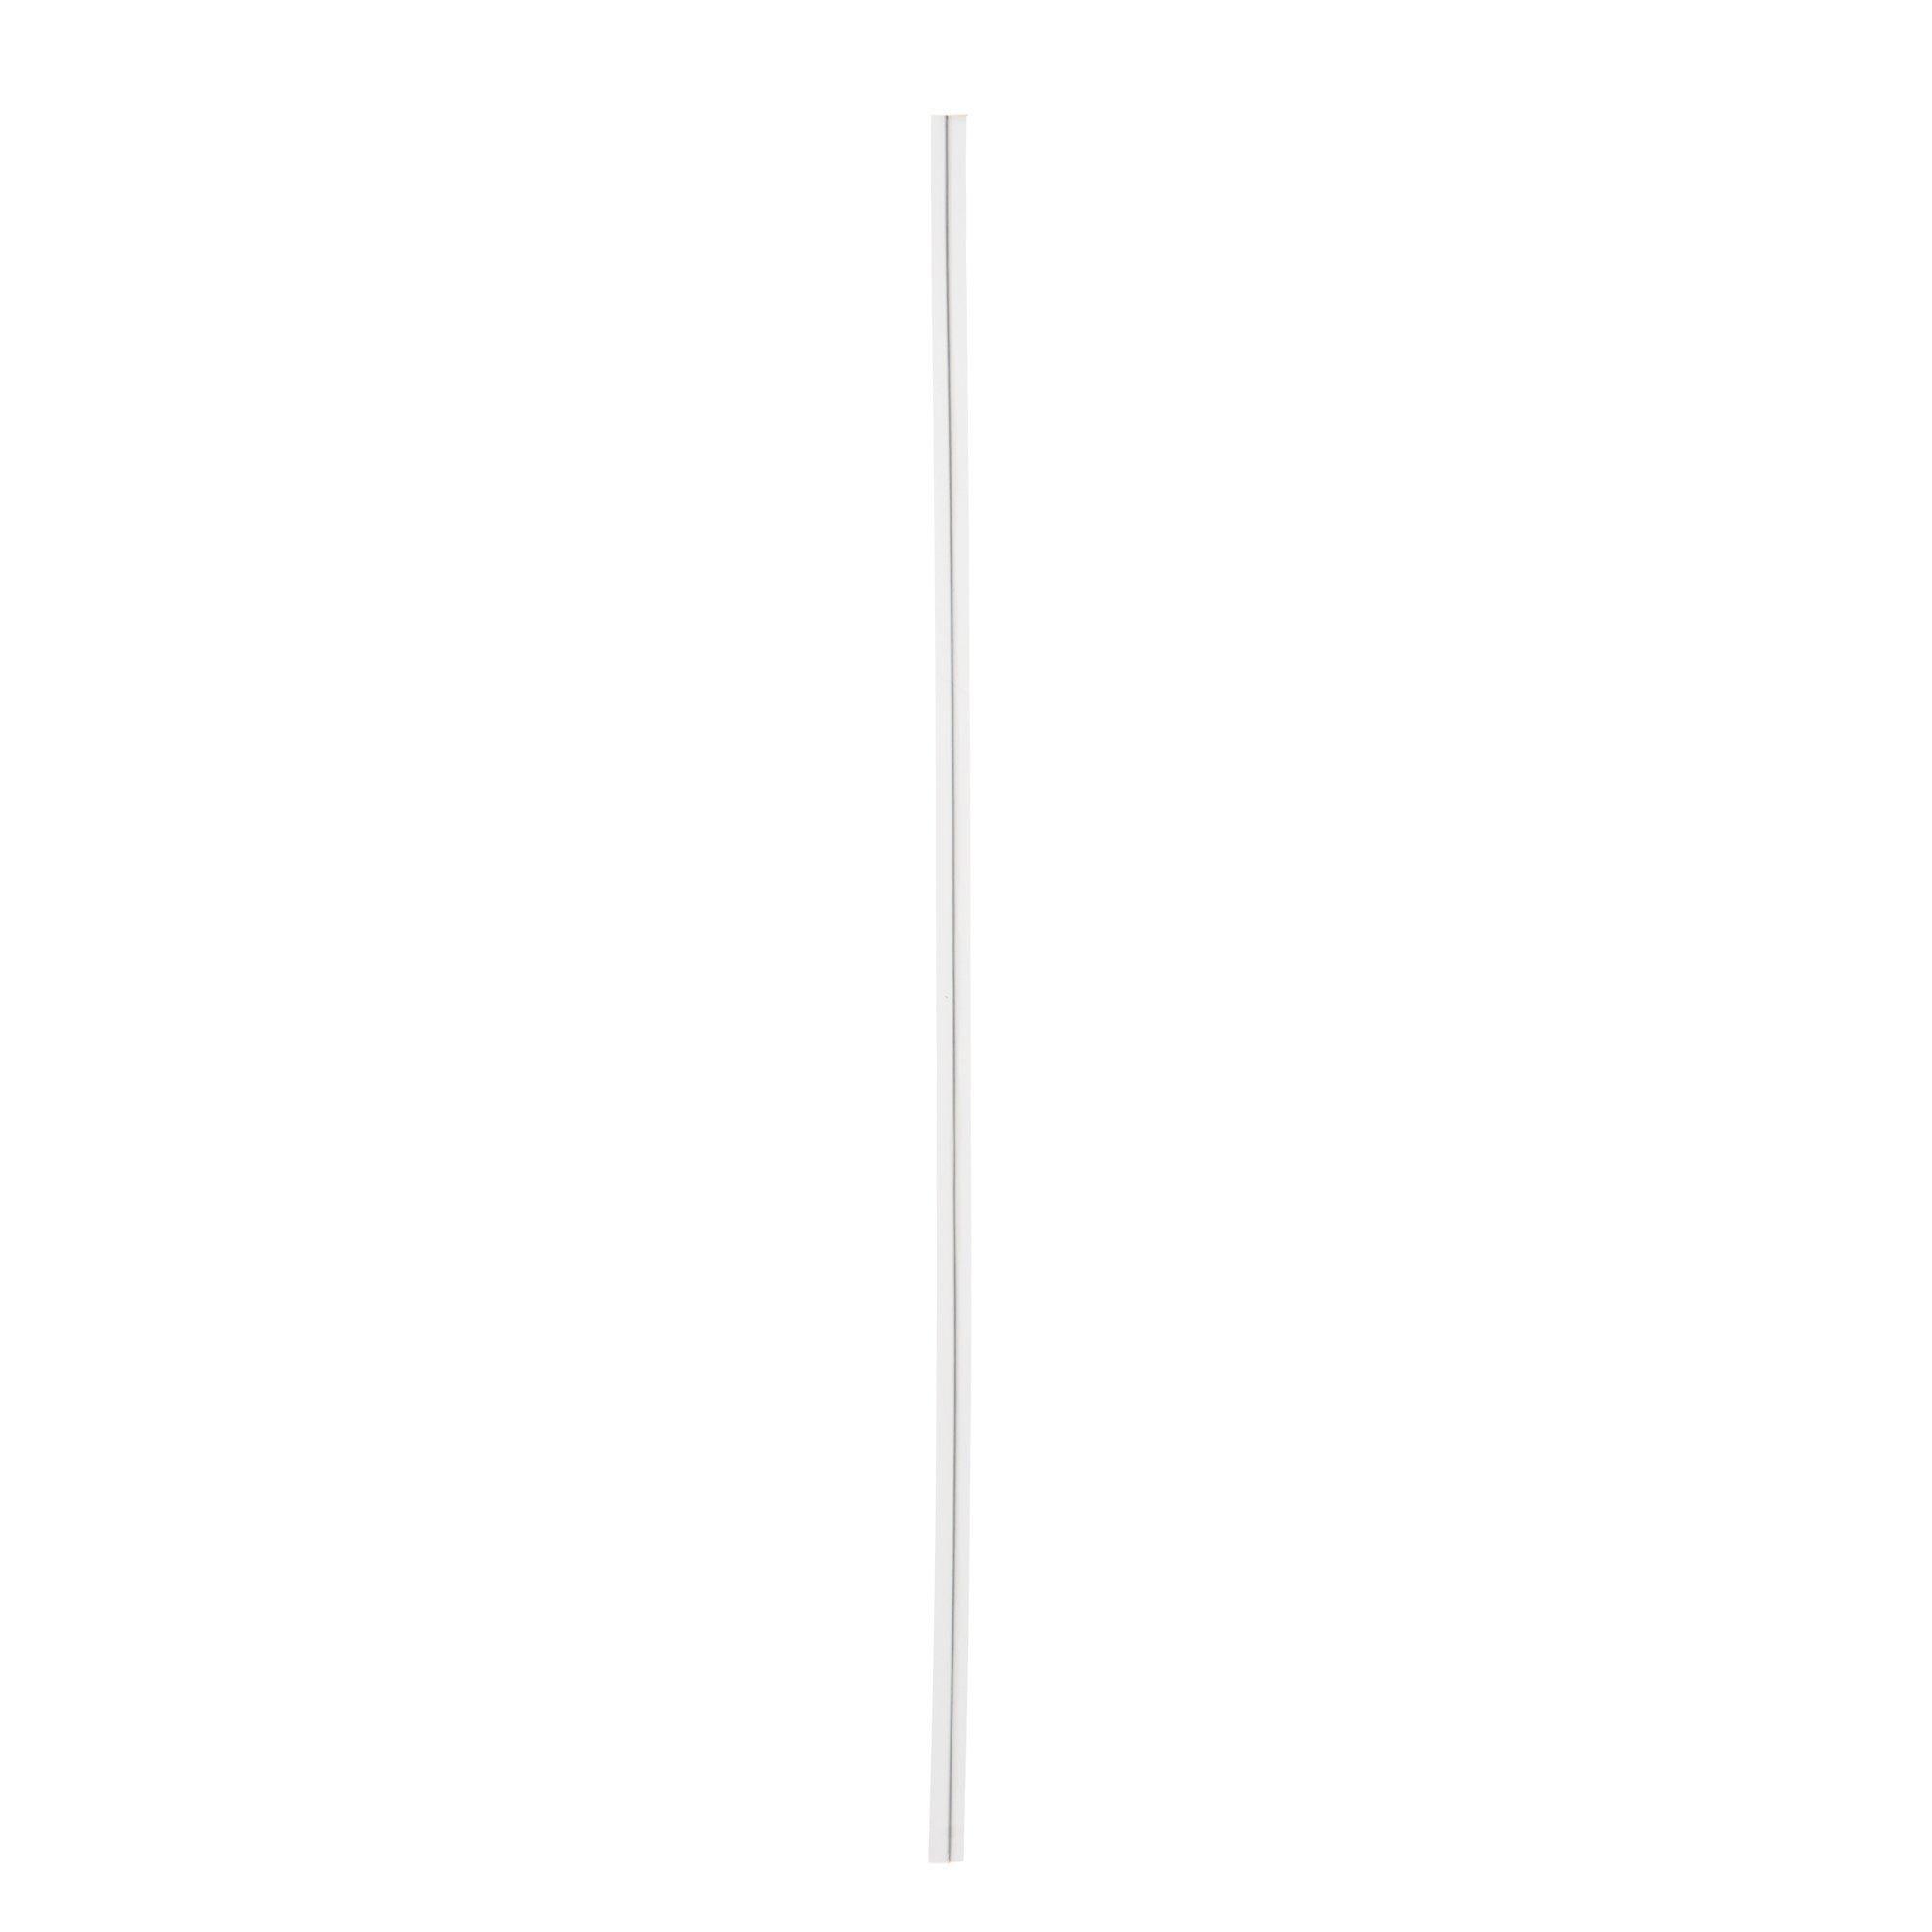 Small White Bow on Twistie 25 count – Valley Cake and Candy Supplies